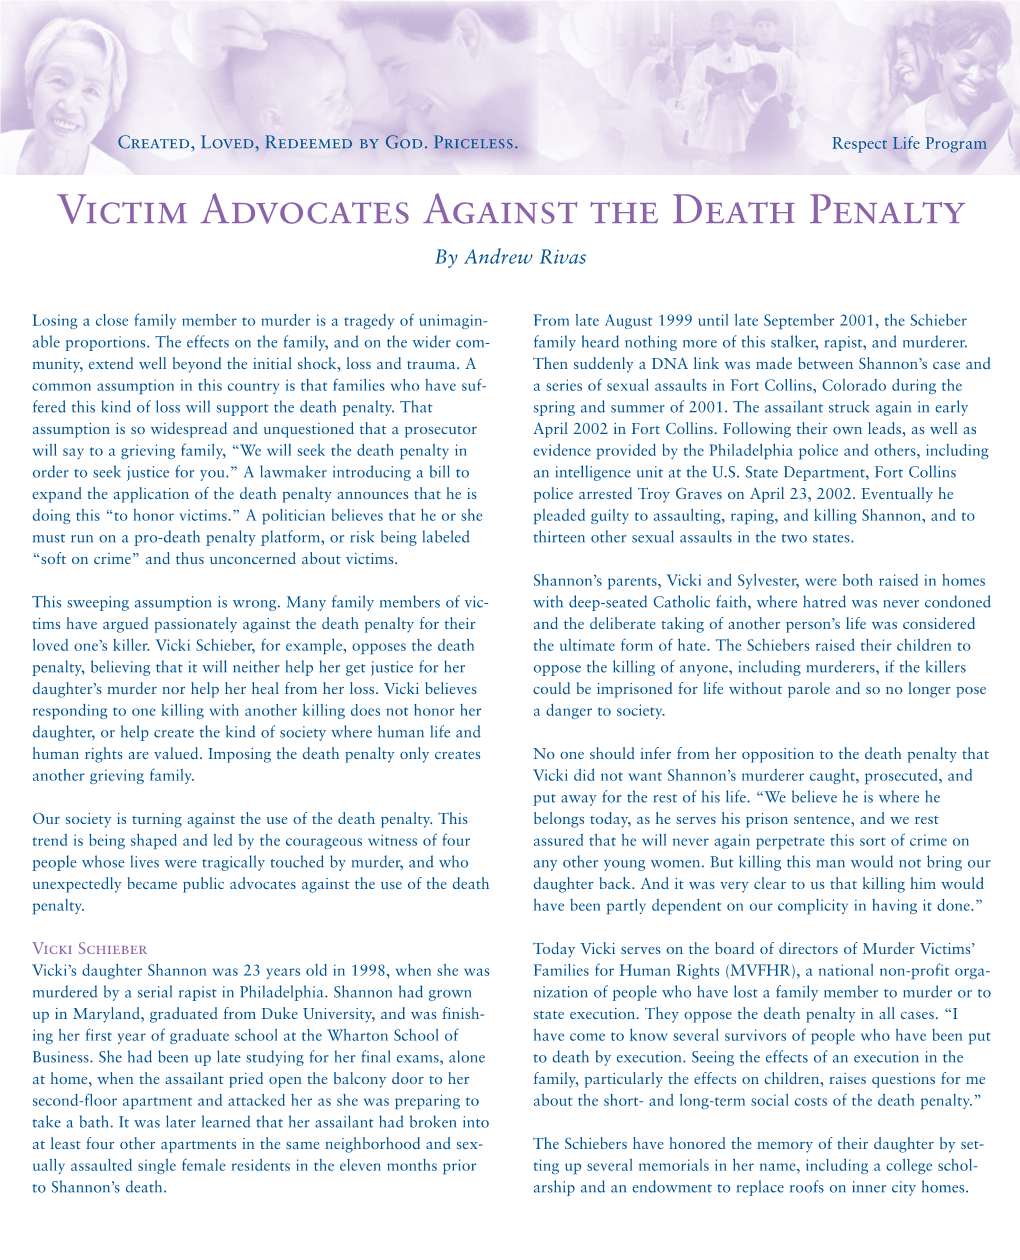 Victim Advocates Against the Death Penalty by Andrew Rivas